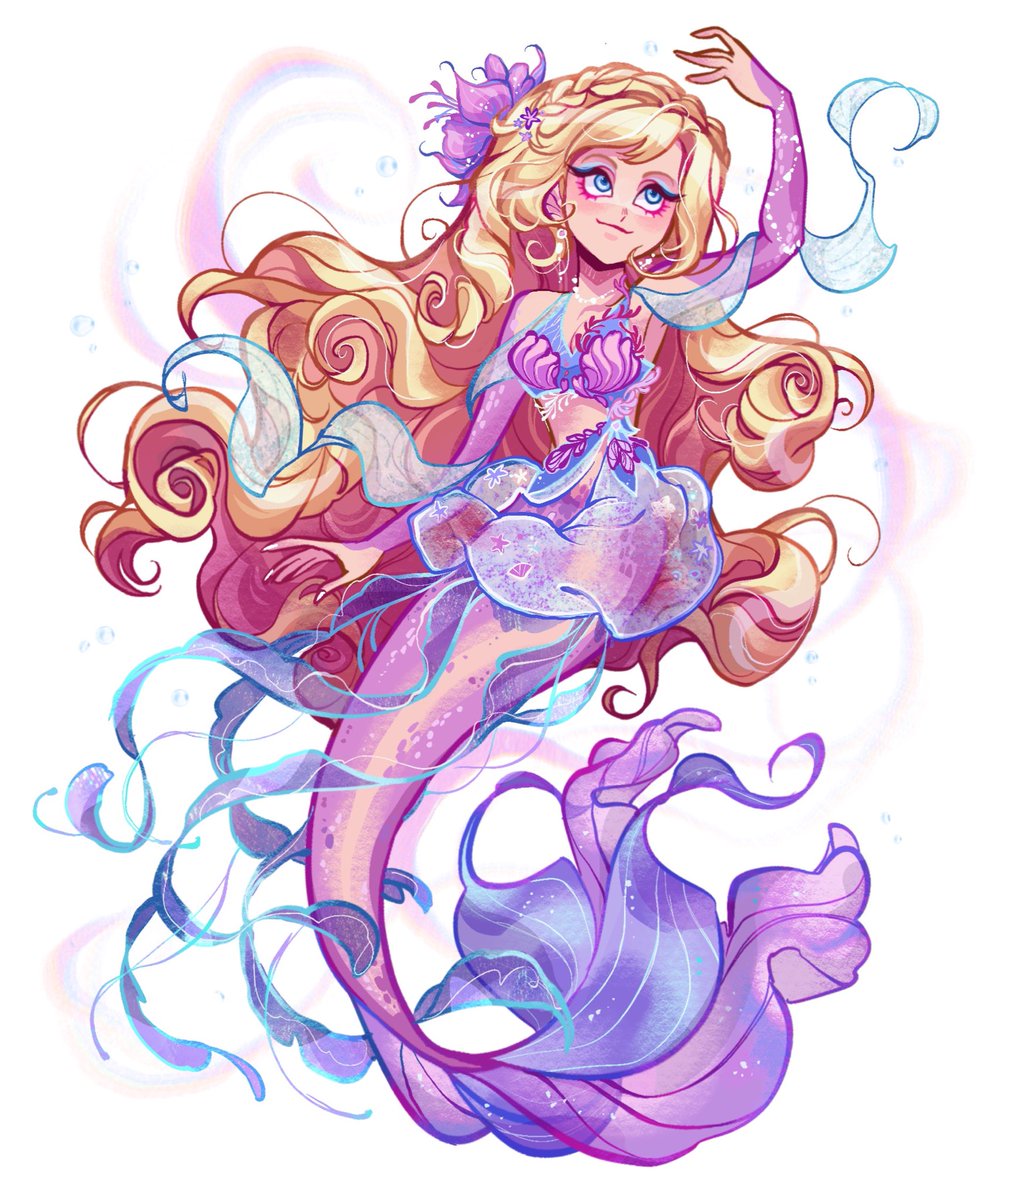 #Commission #commisionsopen 
Mermaid commission!🐠